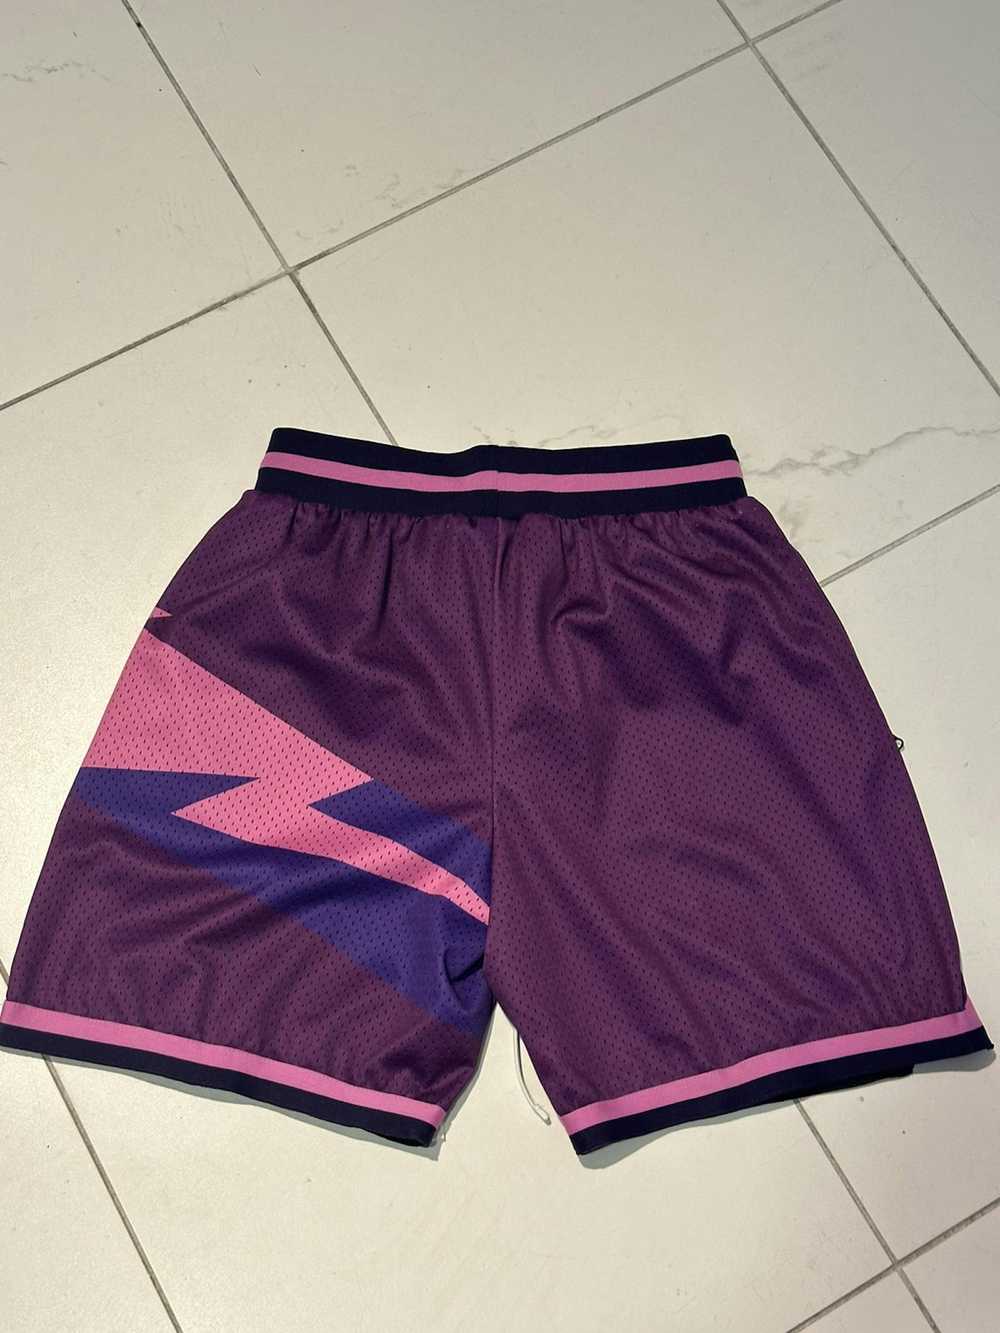 Collect and Select Collect + Select Suns Shorts L… - image 6